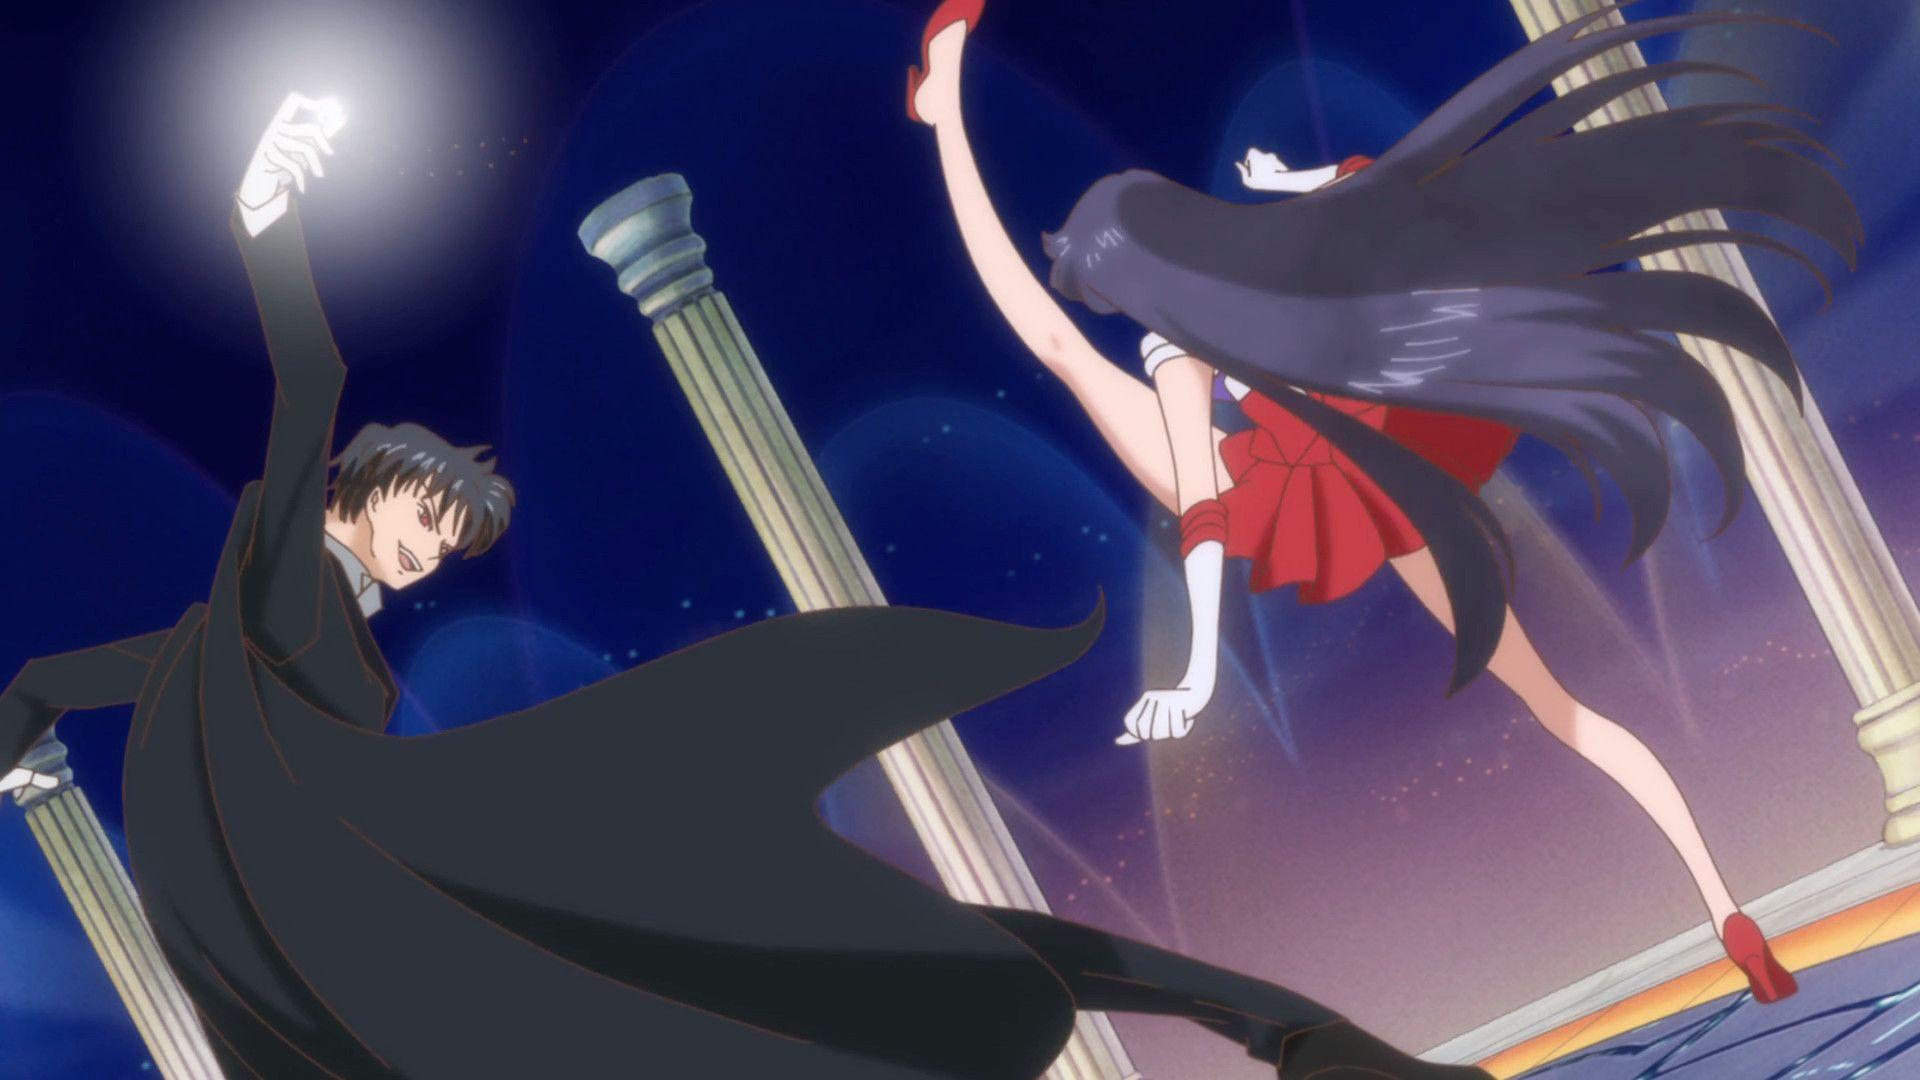 1920x1080 Sailor Moon And Tuxedo Mask Wallpapers